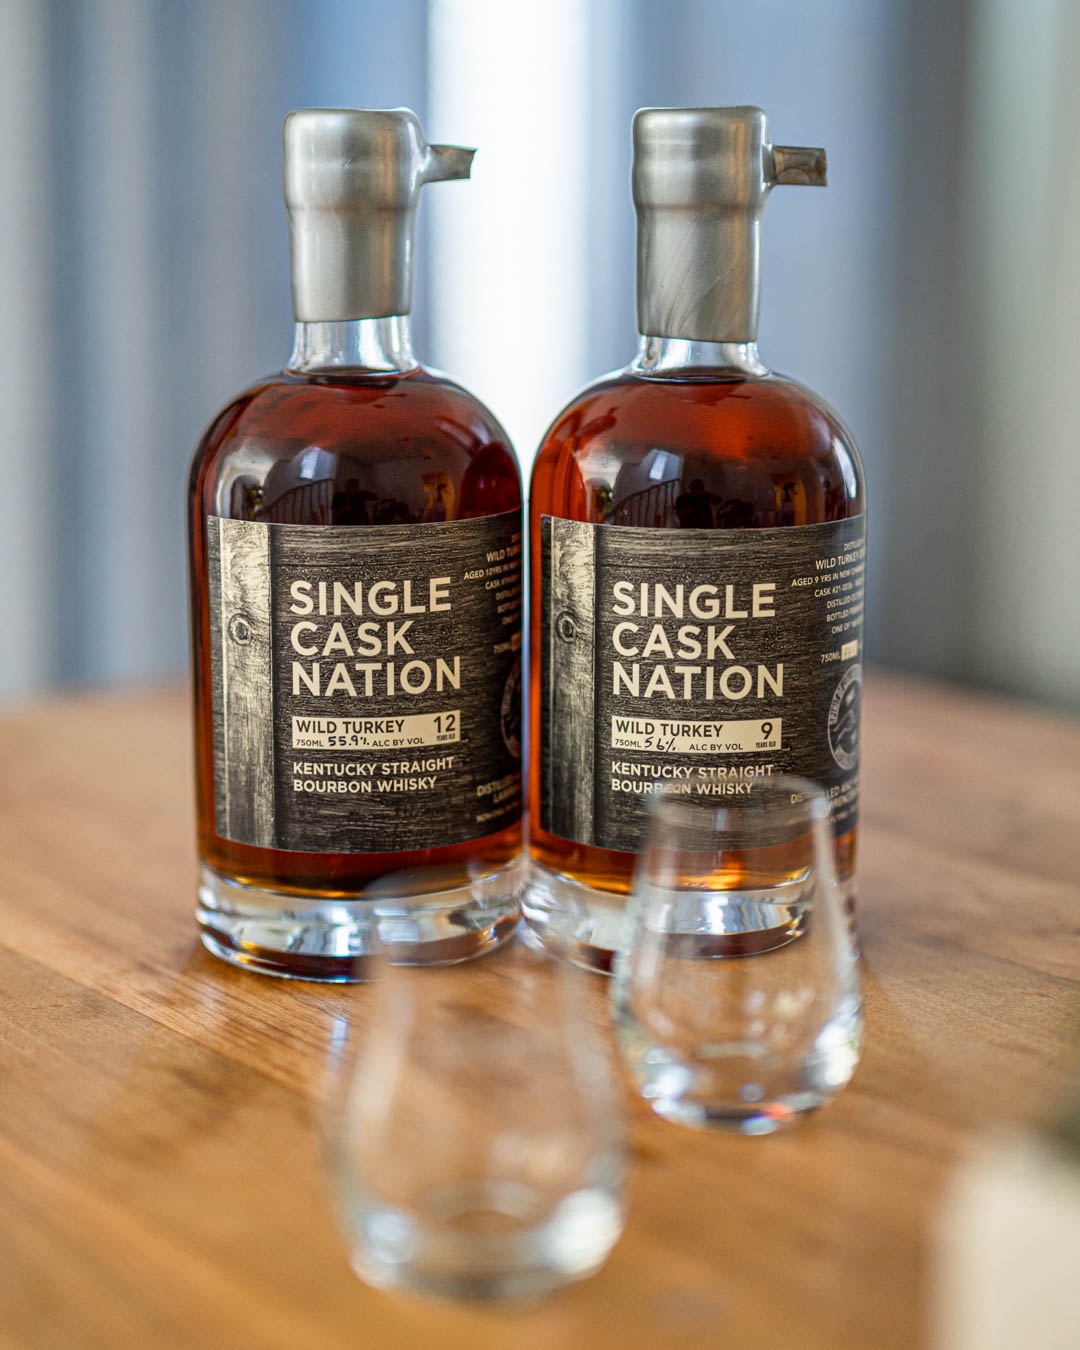 Single Cask Nation Acquired by Owner of The Scotch Malt Whisky Society